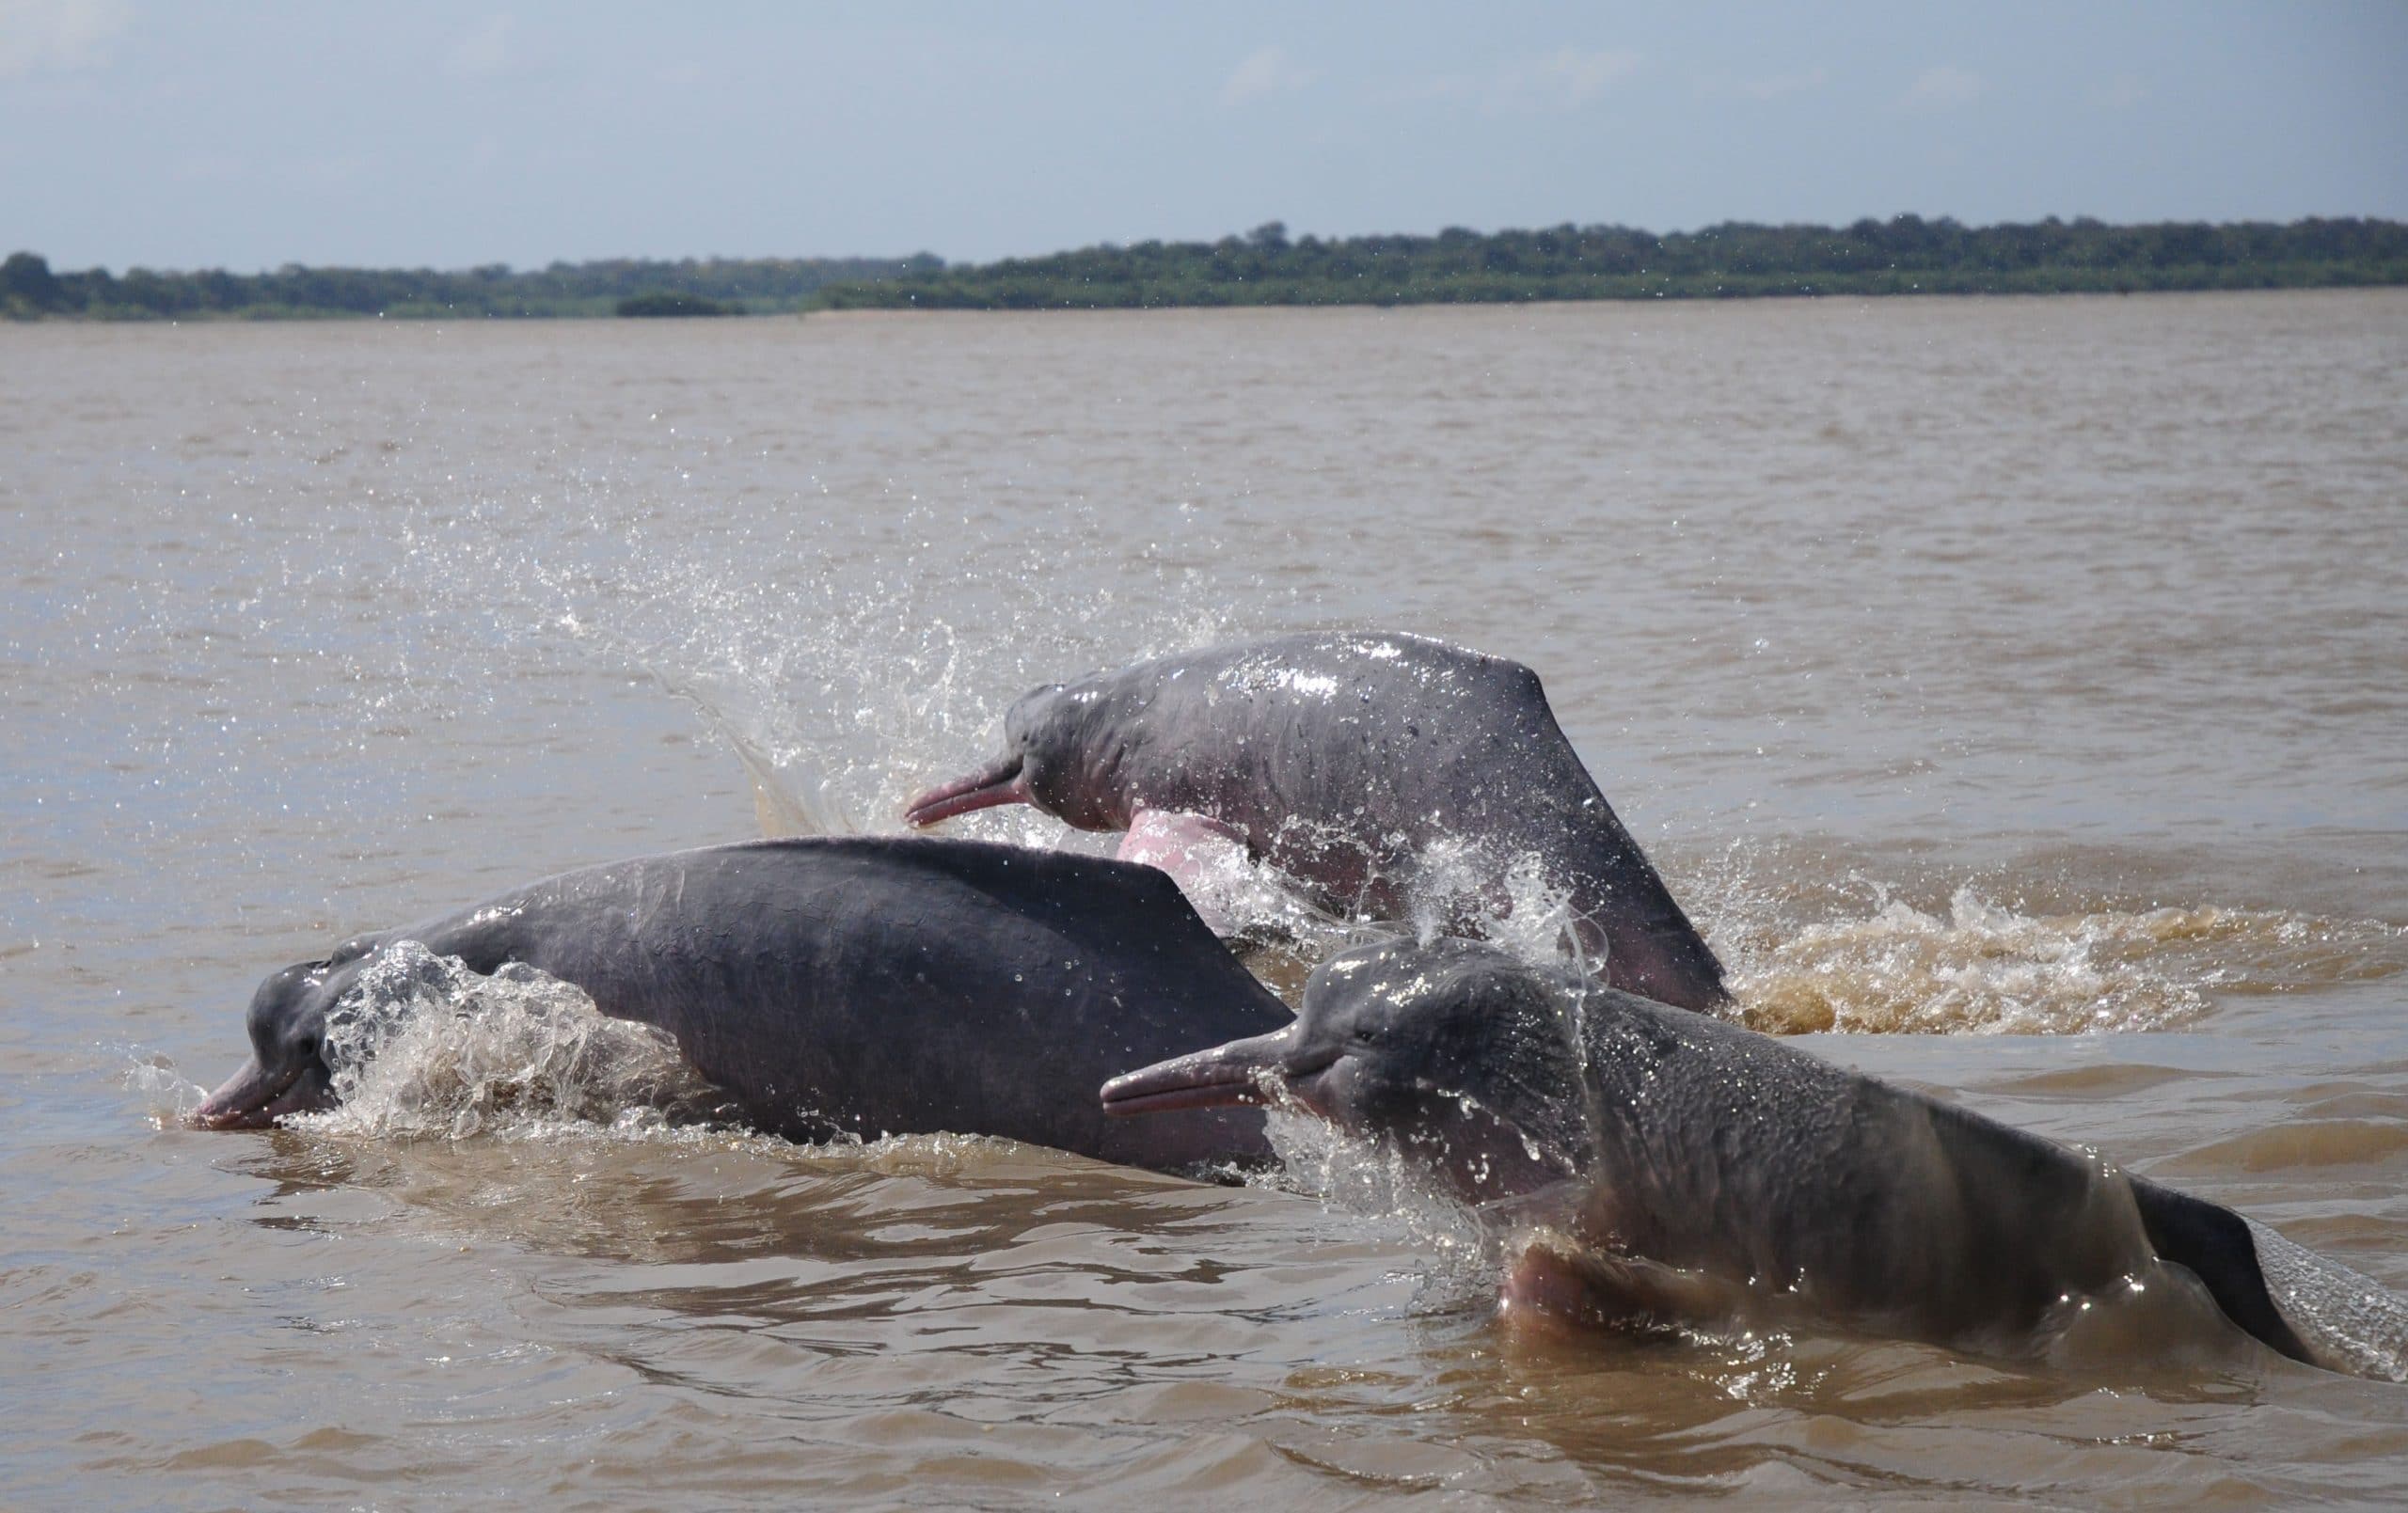 Botos leaping in the Amazon river